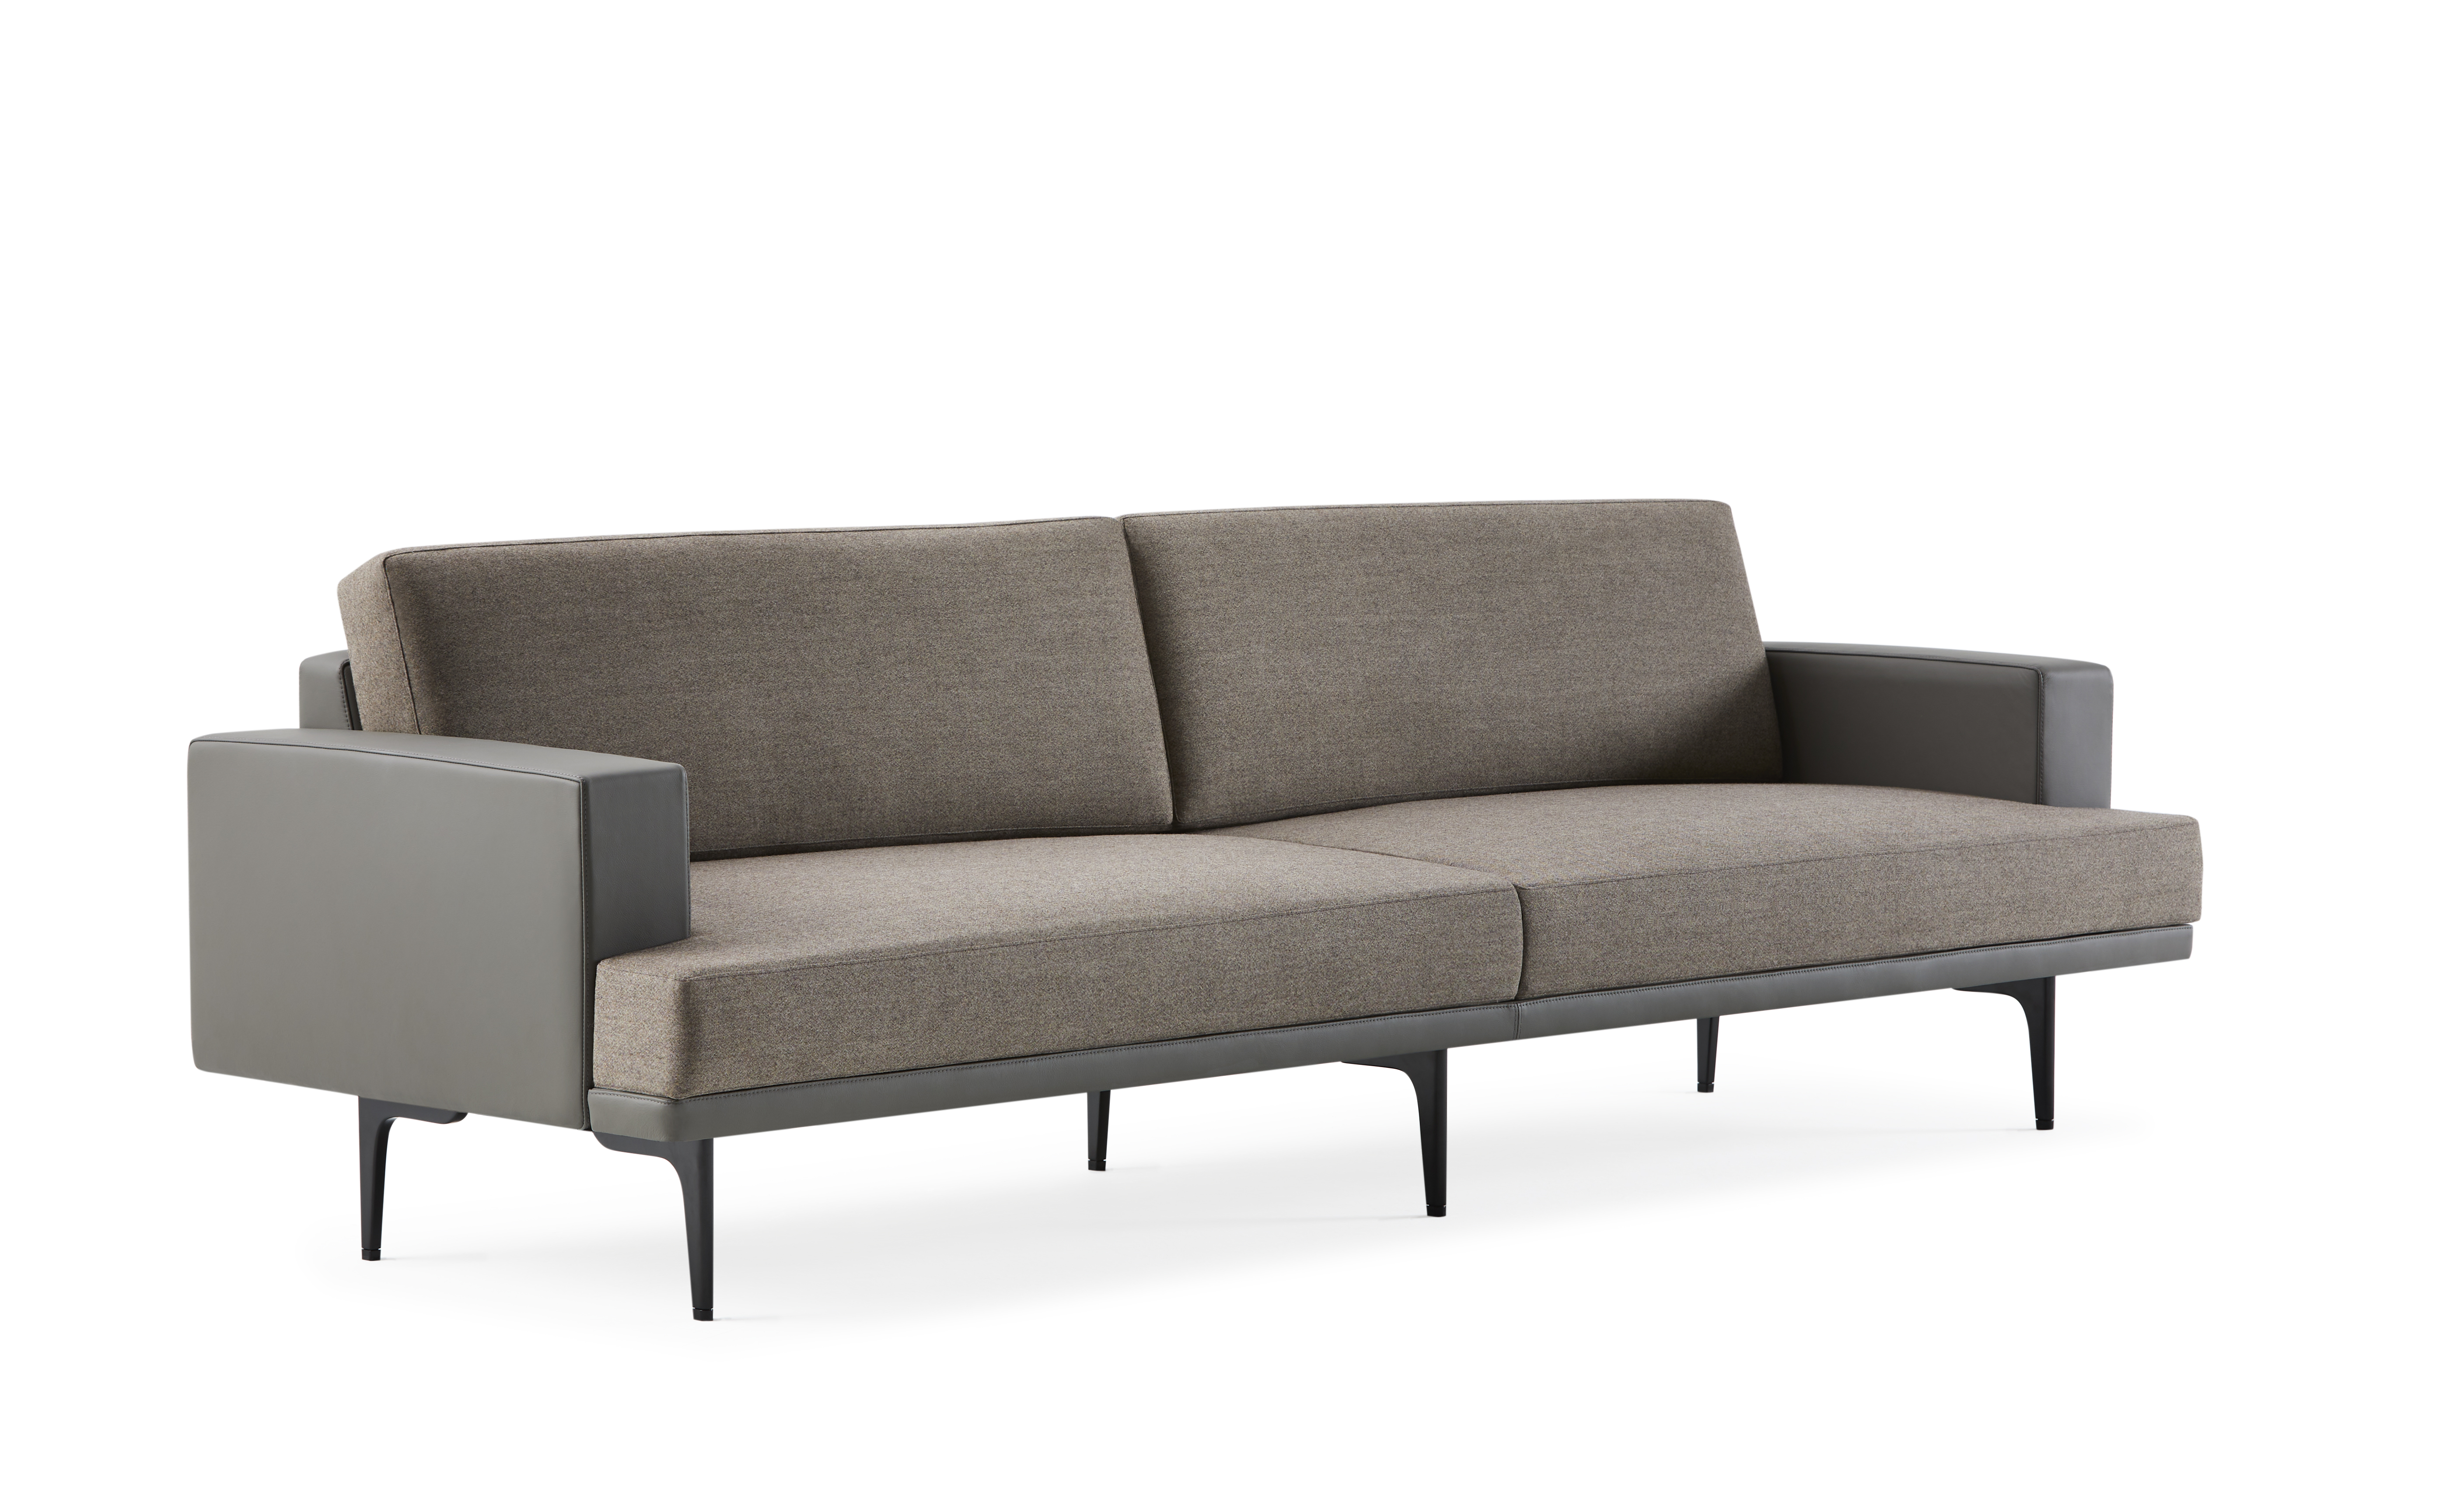 HAWORTH, Seating, Lyda is a modular sofa collection for social spaces in commercial and hospitality environments. With a